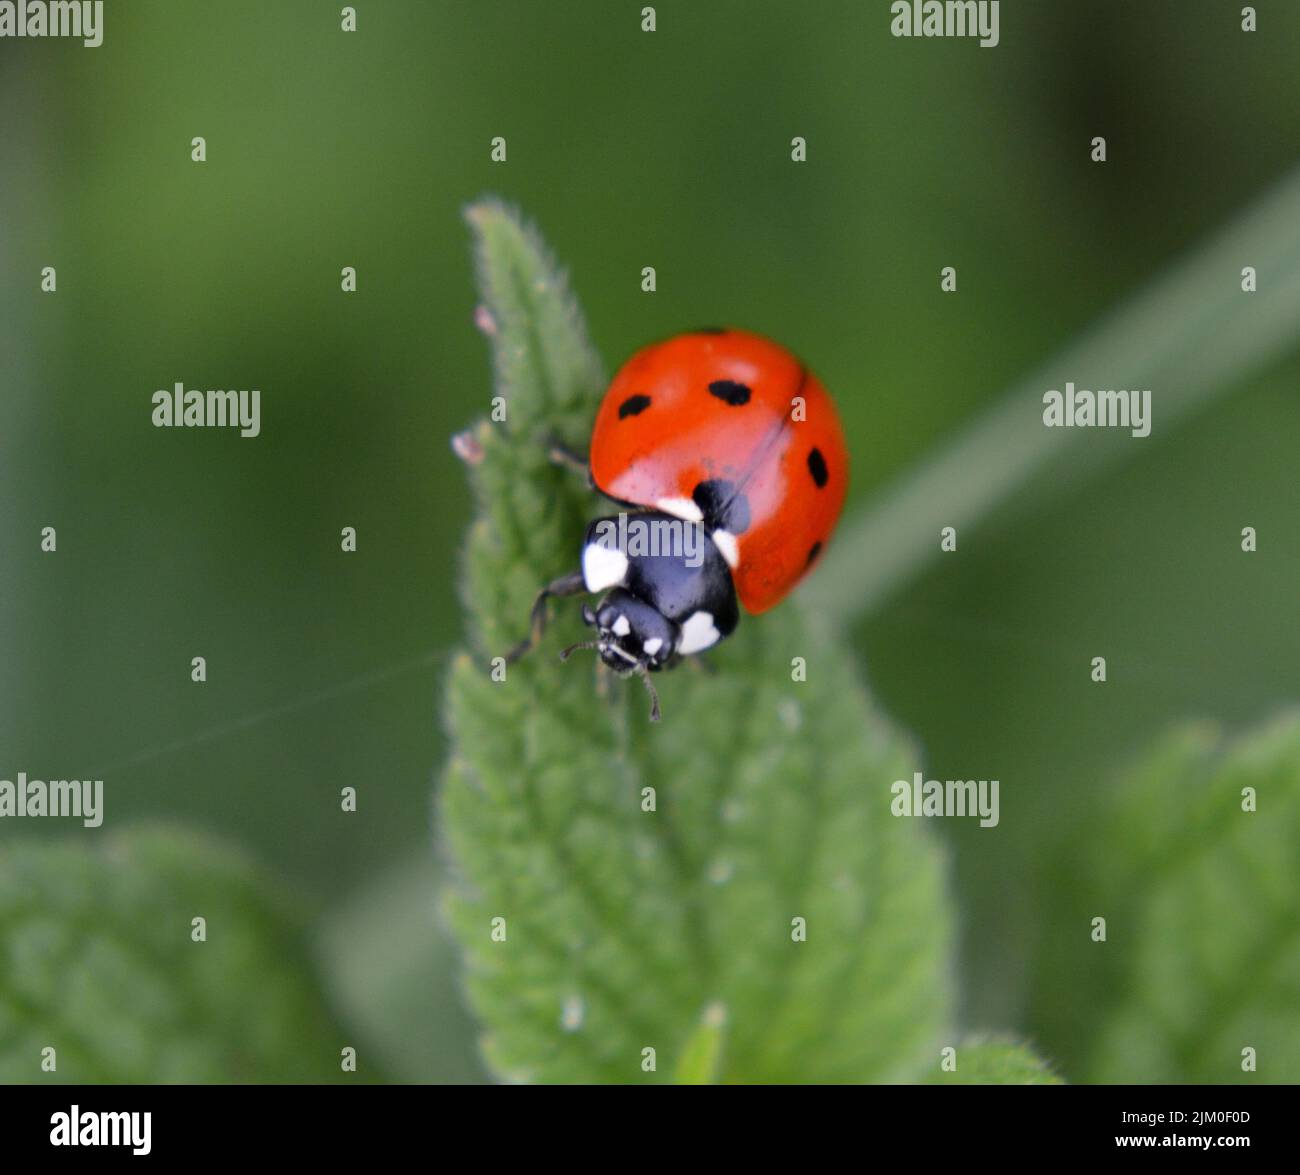 A closeup of a seven-spot ladybug sitting on a green leaf of a plant on a blurry background Stock Photo